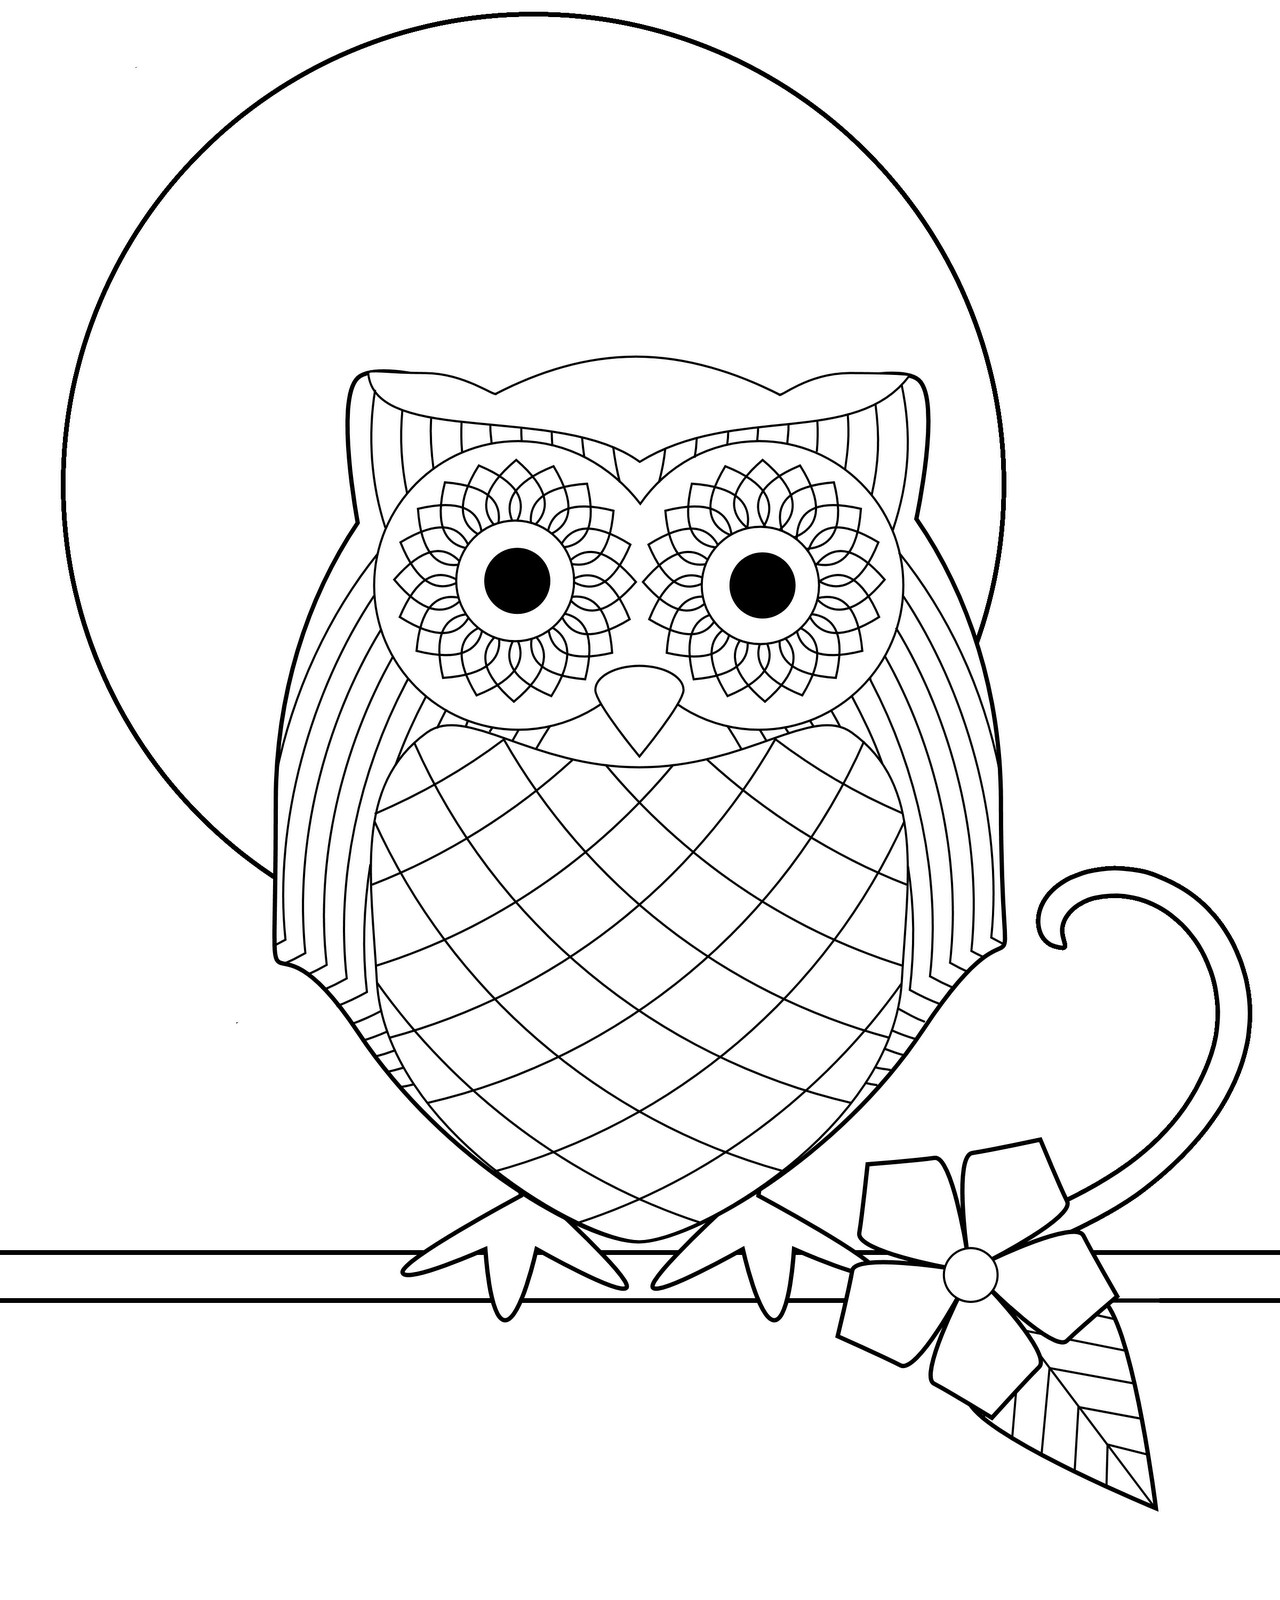 Coloring Pages For Girls Owls
 Free Printable Owl Coloring Pages For Kids